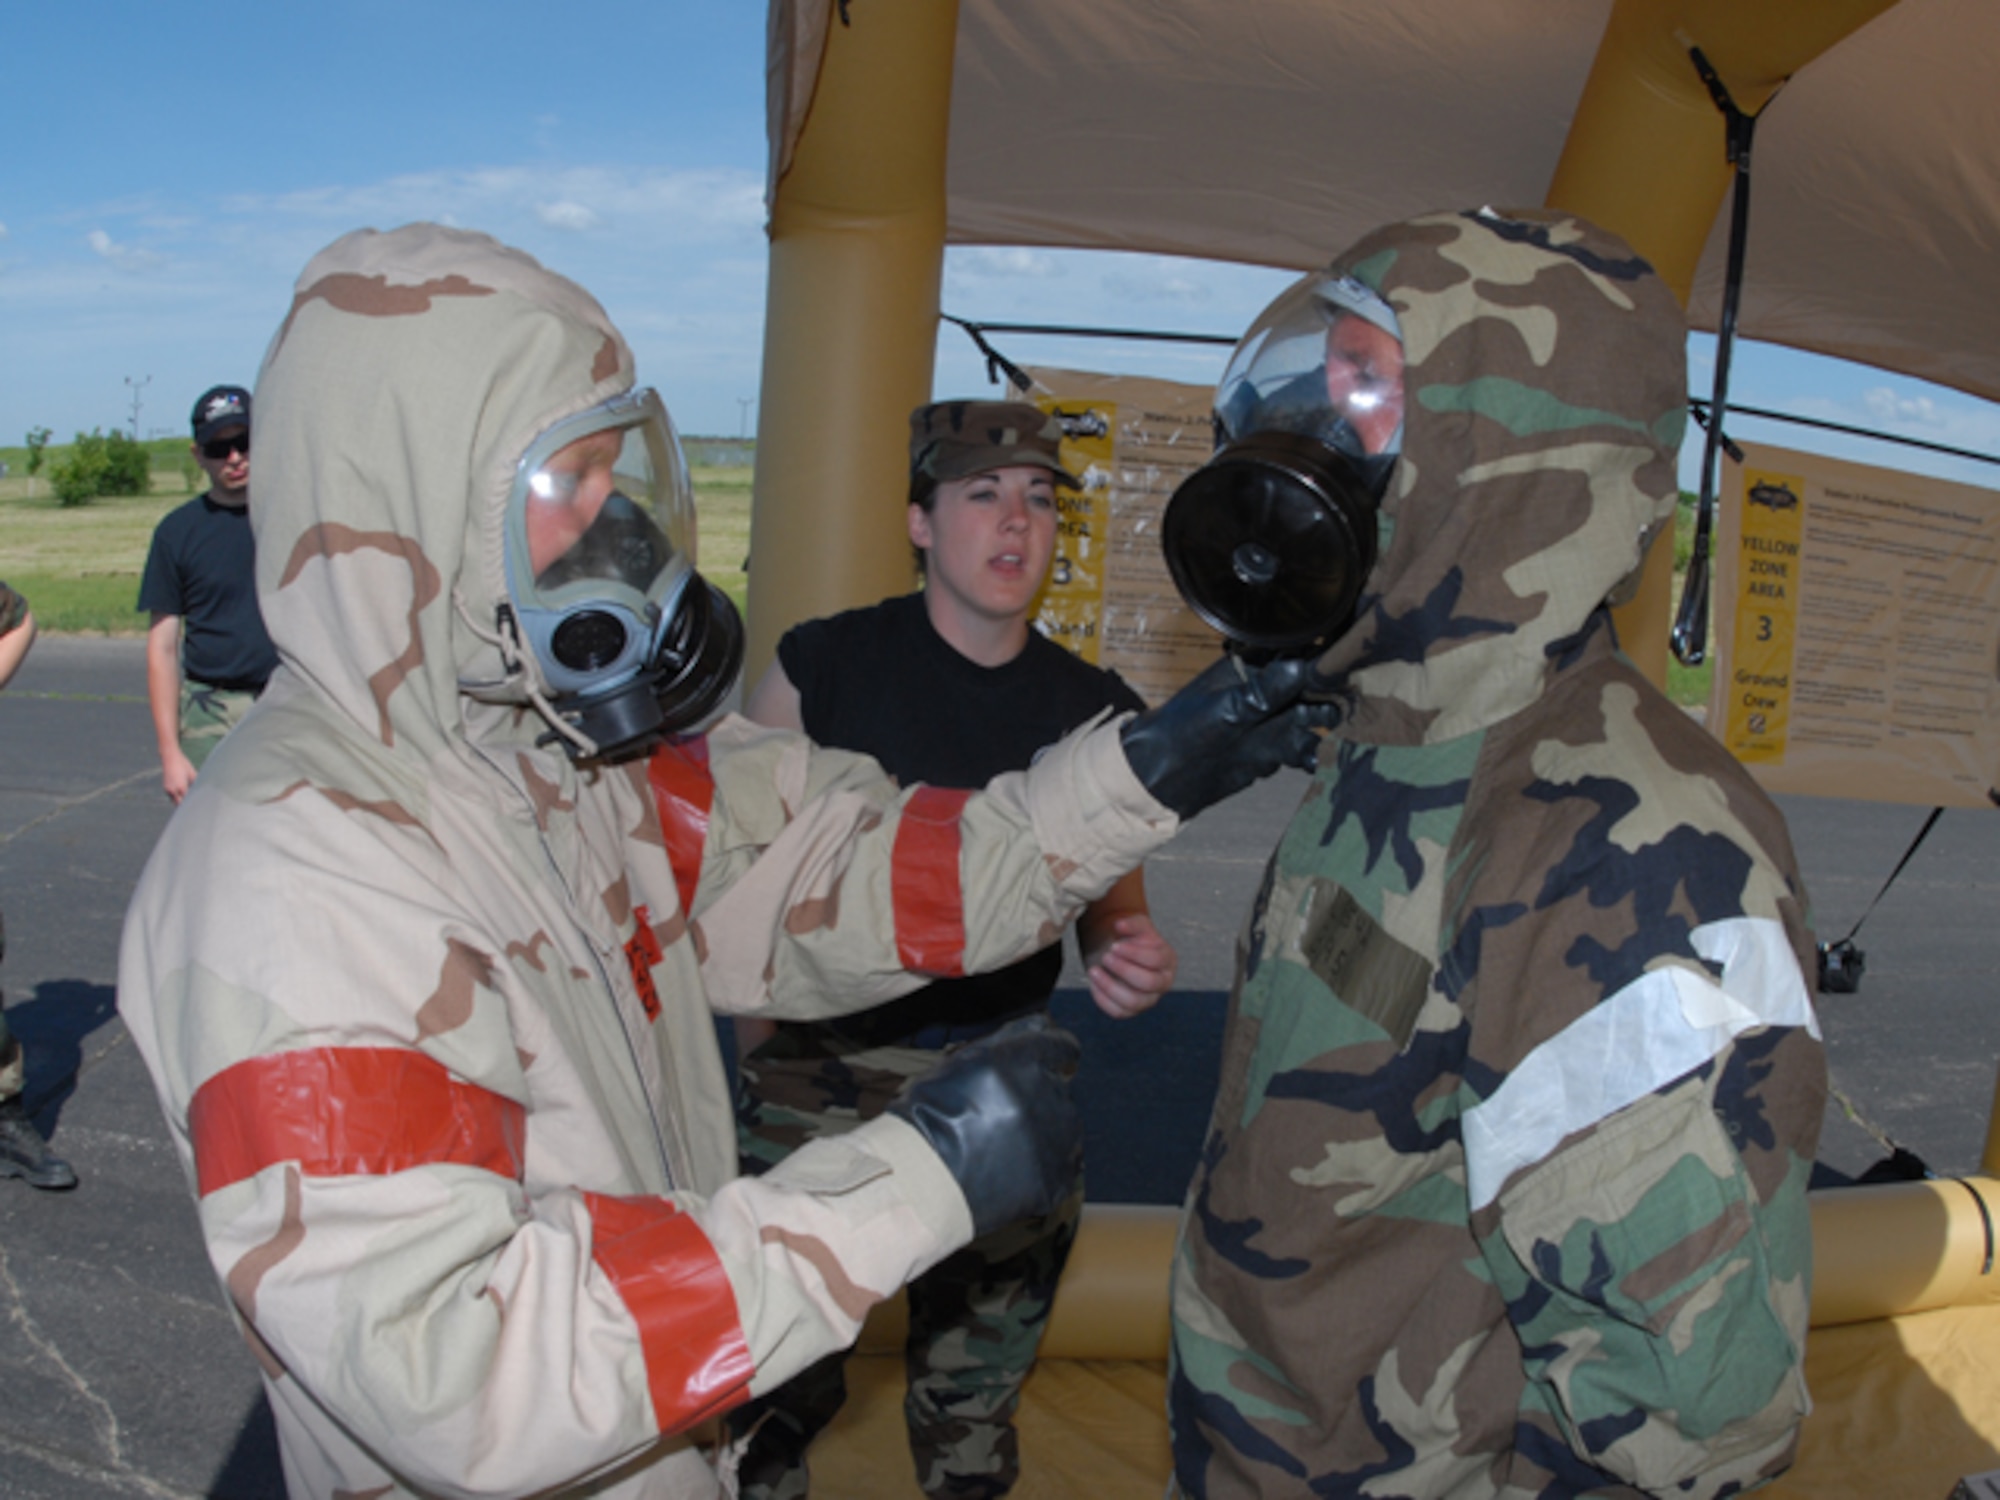 Airmen go through a decontamination line at the 119th Wing, N.D. Air National Guard during Emergency Management Training in Fargo on Monday, June 23, 2008.

Photo taken by SMSgt David Lipp, 119th Wing.